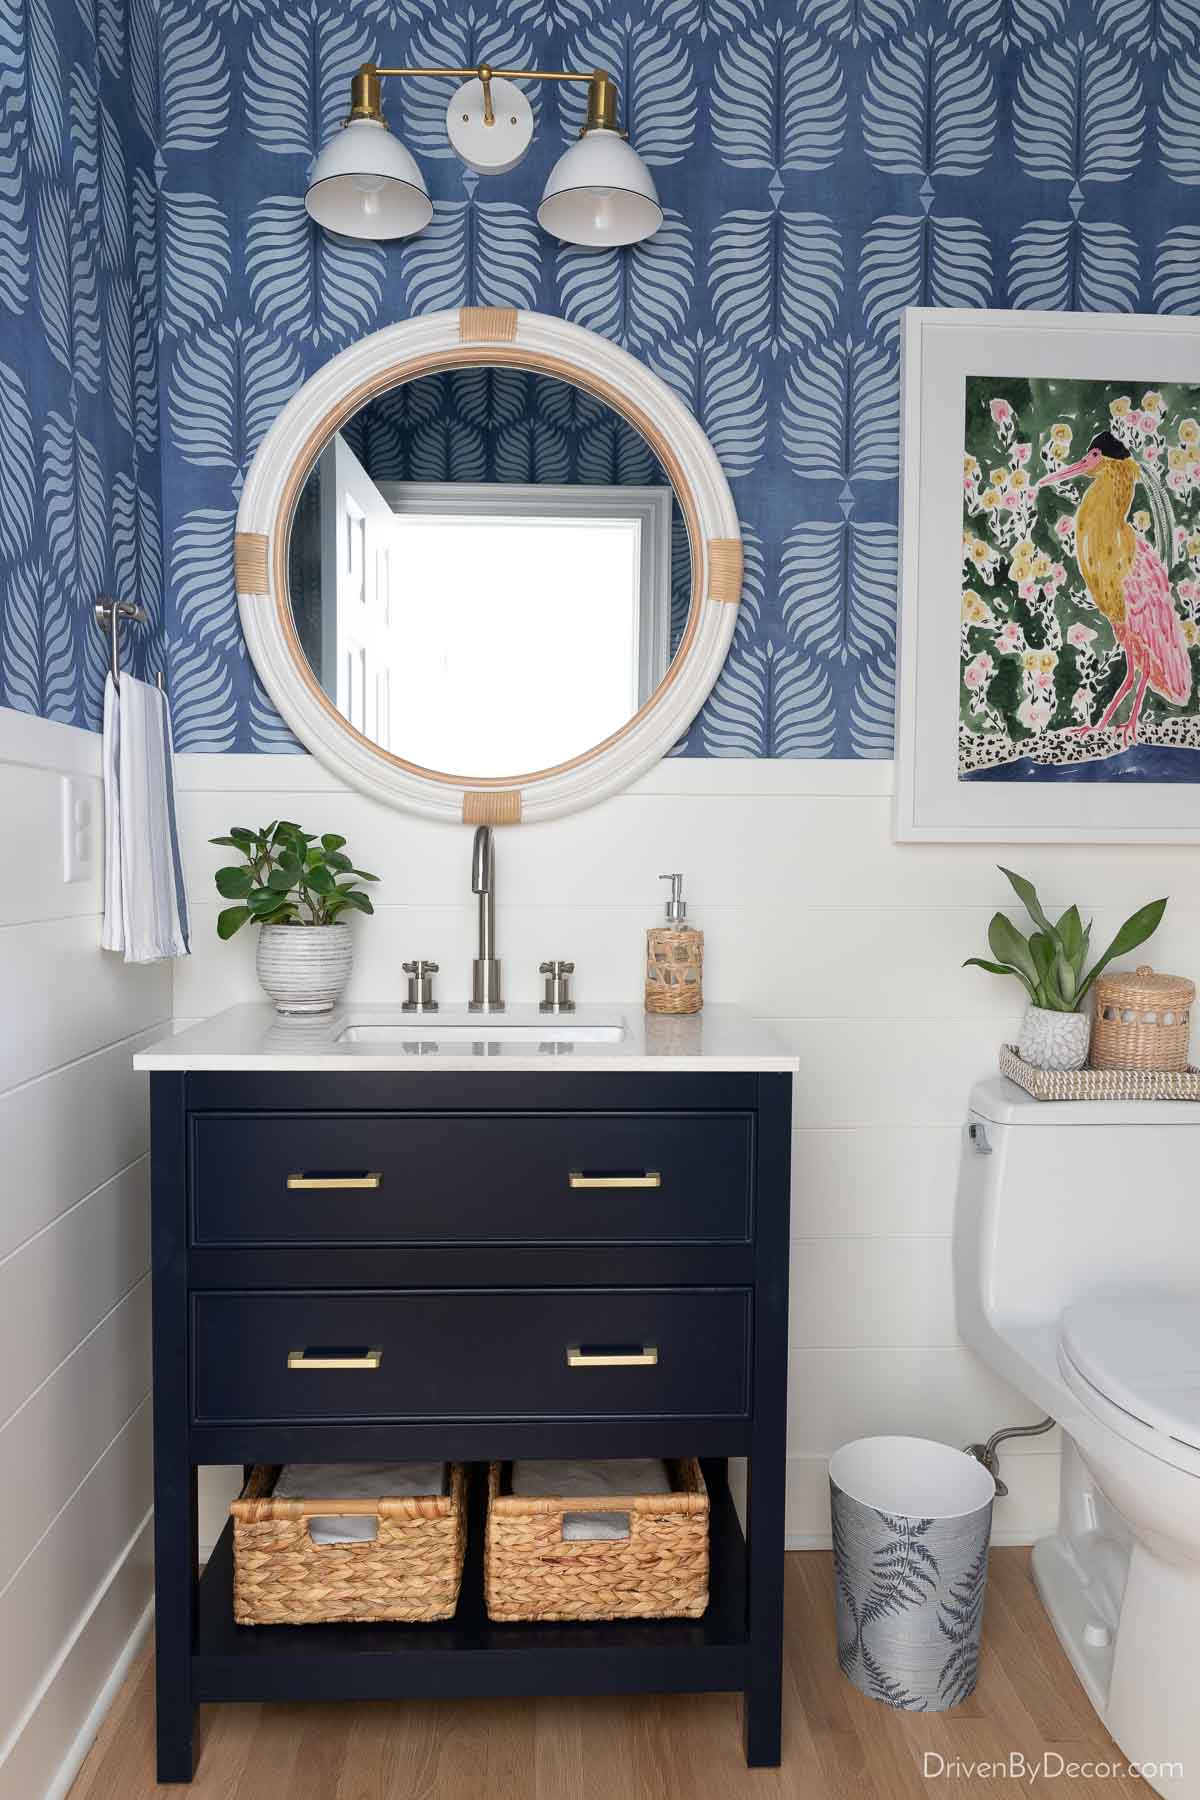 The 30" navy small bathroom vanity in our hall bathroom